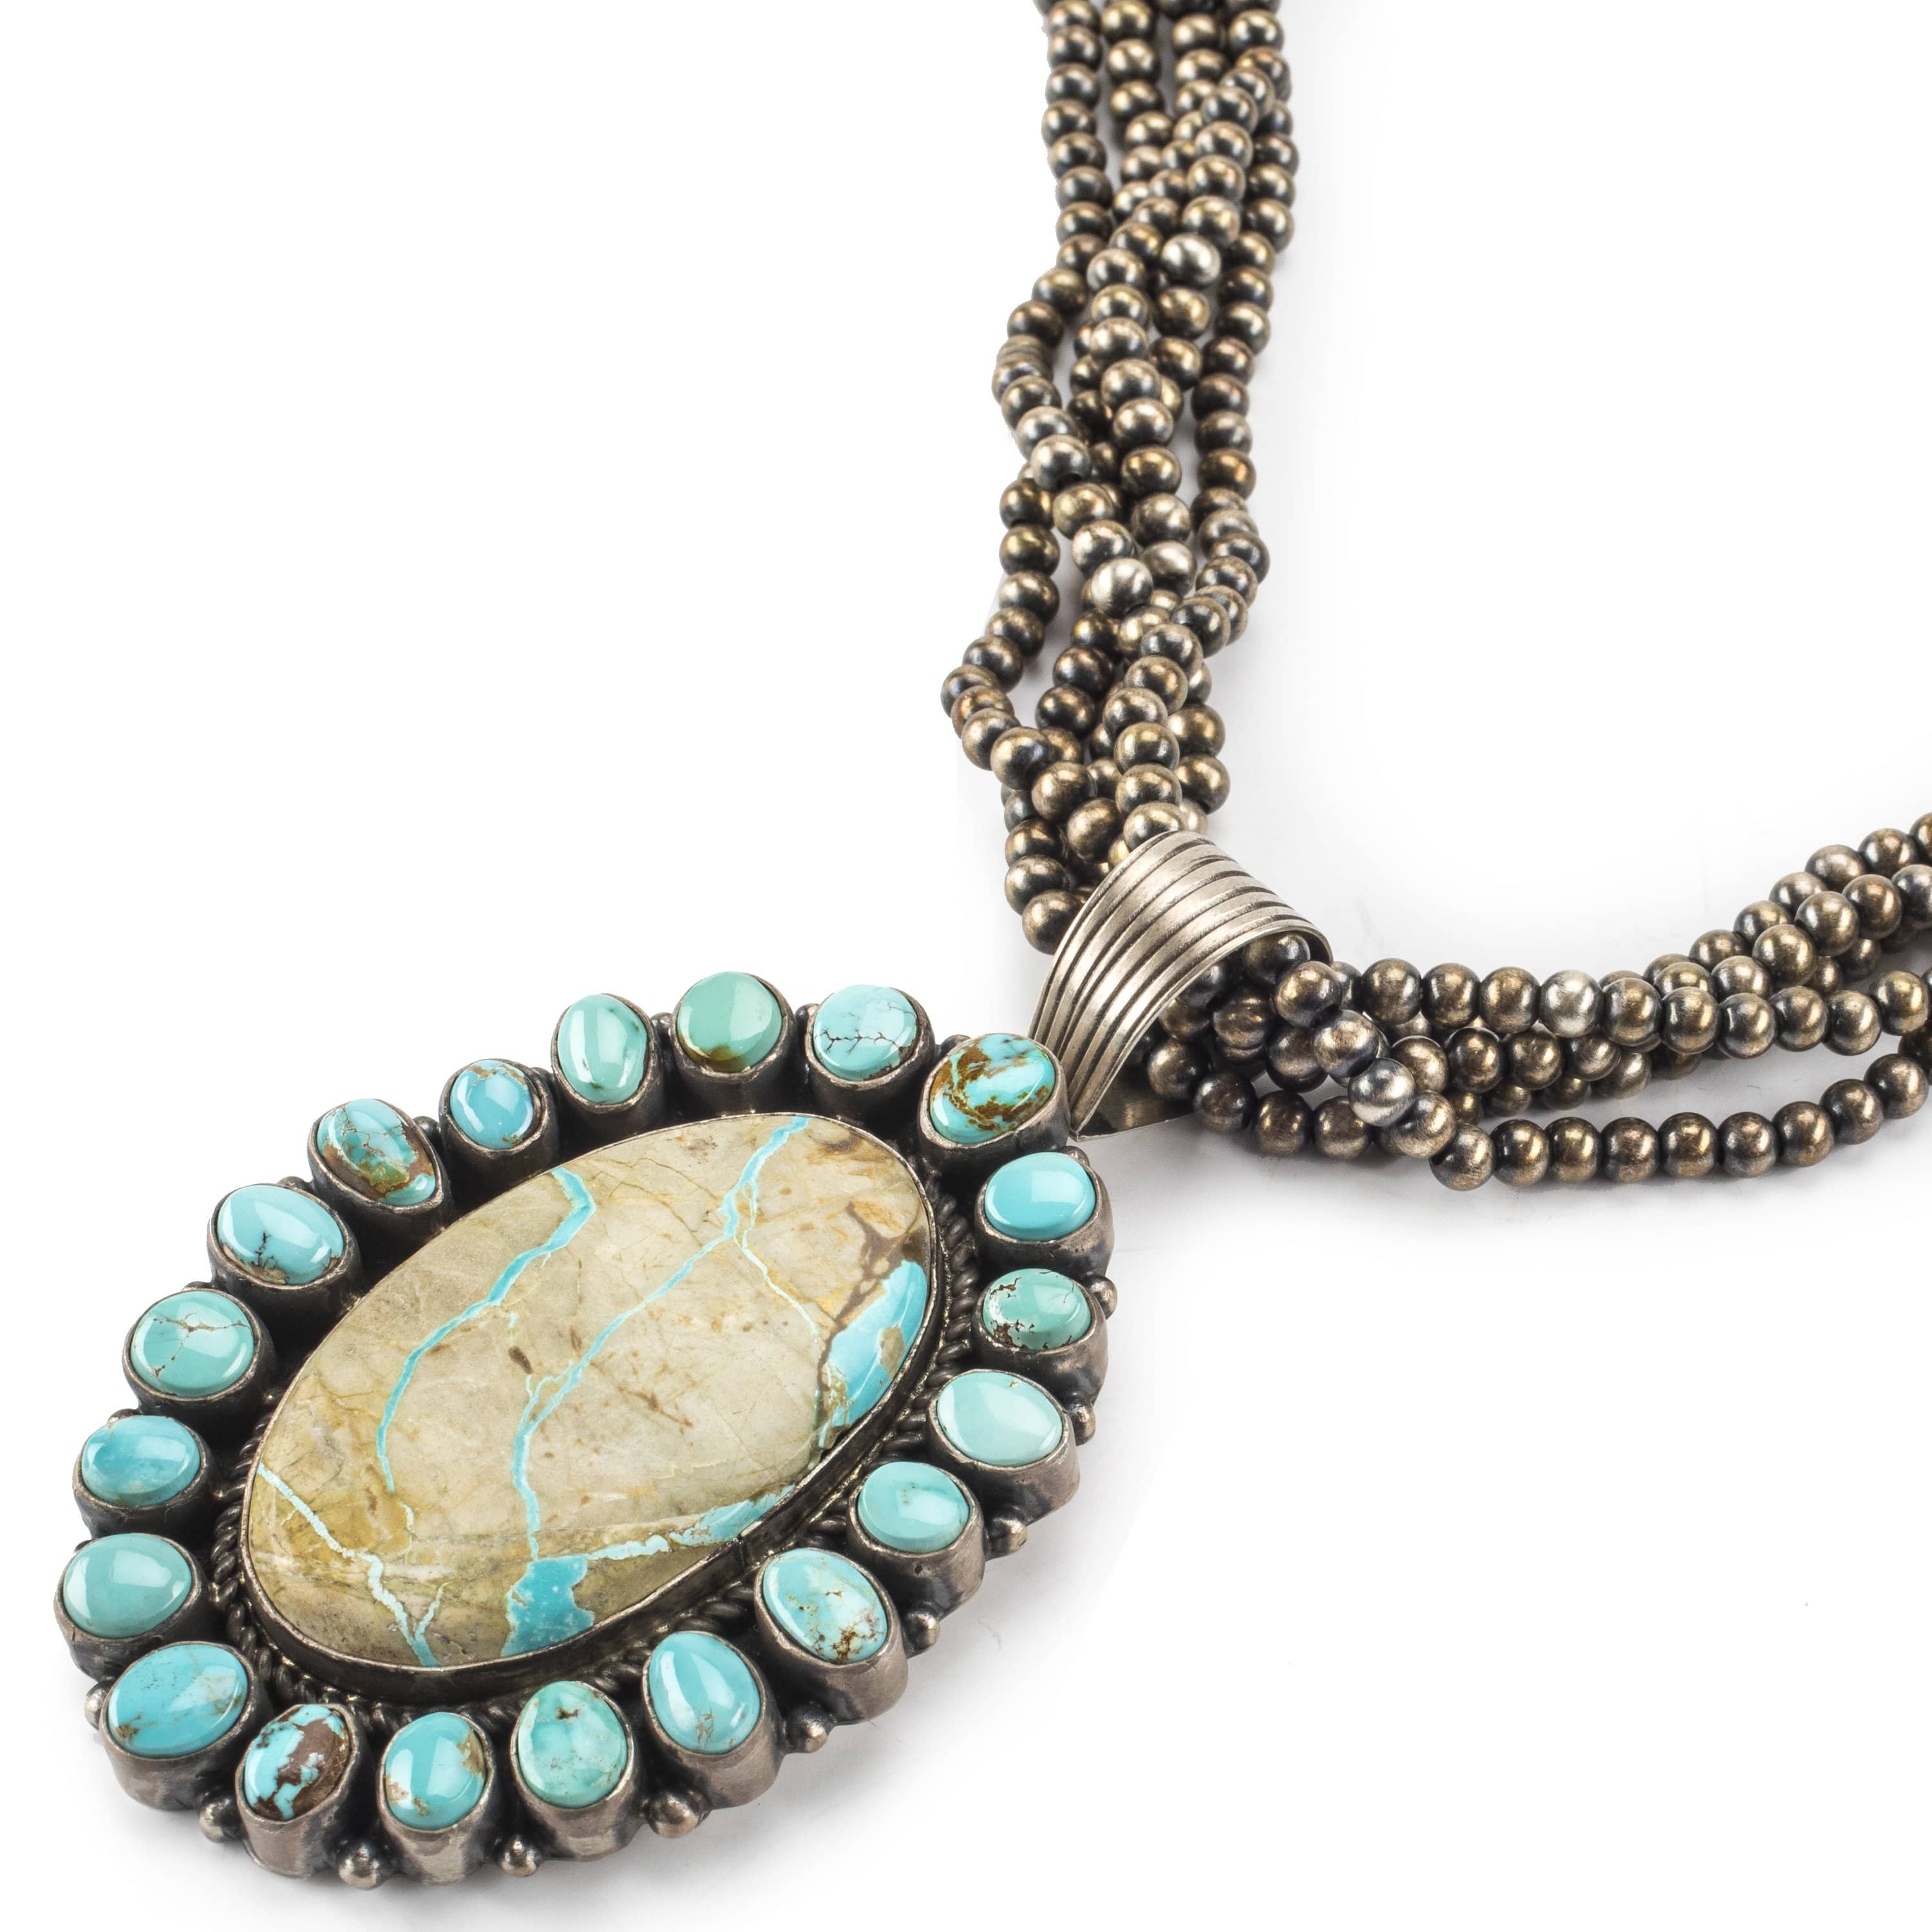 kalifano native american jewelry dry creek and boulder turquoise pendant with navajo pearl necklace usa native american made 925 sterling silver set nan3000 004 15289997787196